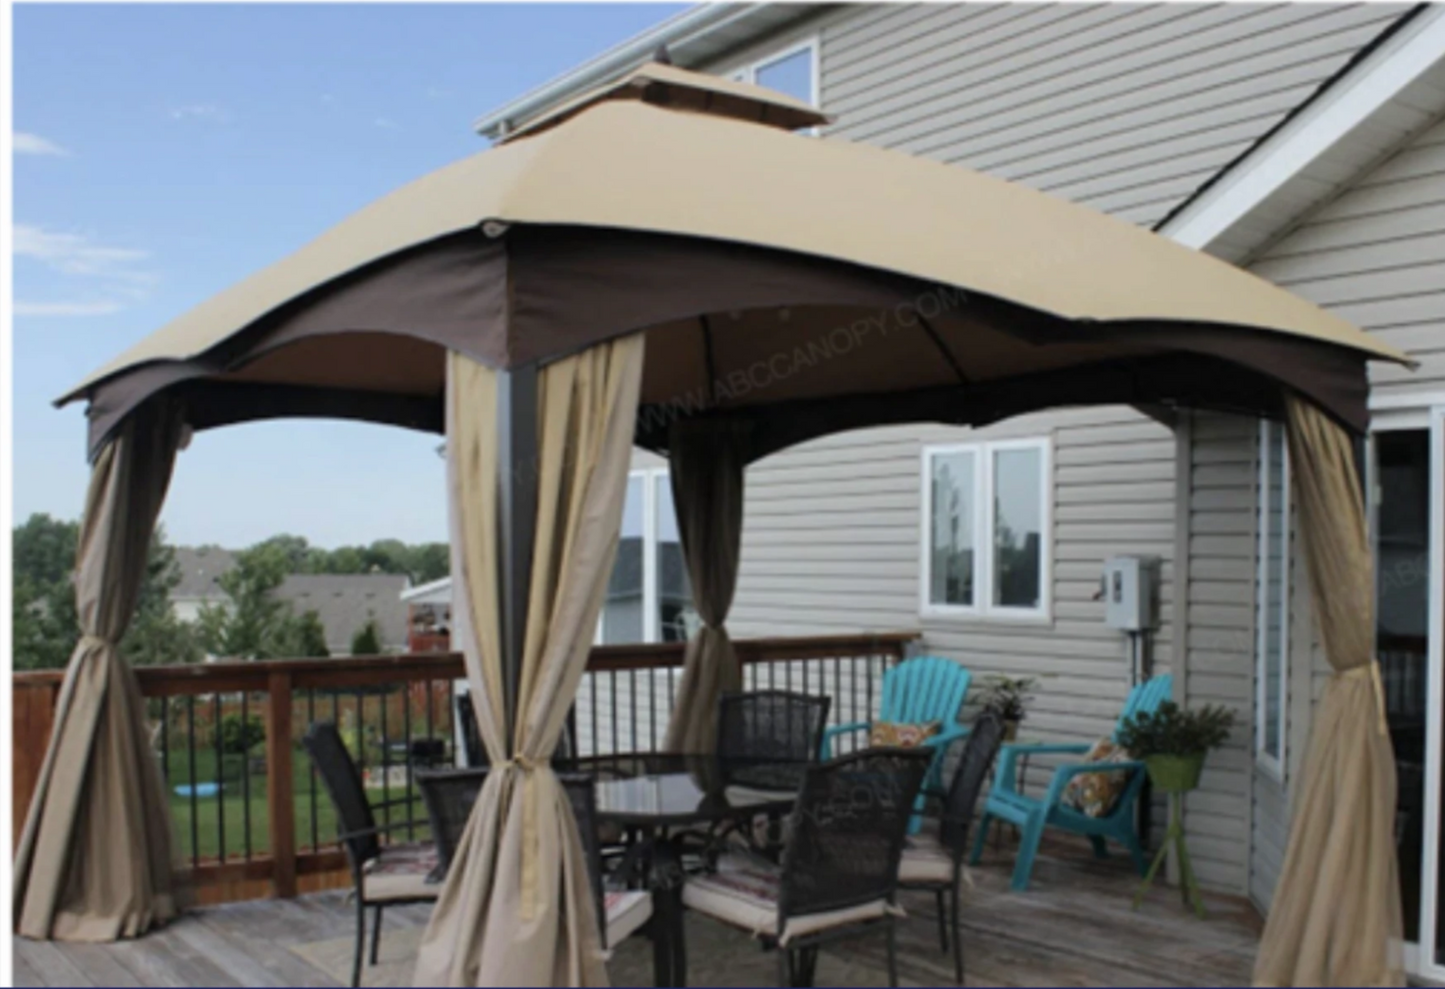 Lowes Allen and Roth 10 X 12 510327 GF12S004B & GF12S004B1 Gazebo Refresh Bundle Canopy,Bug Screen,Curtain All in one Package